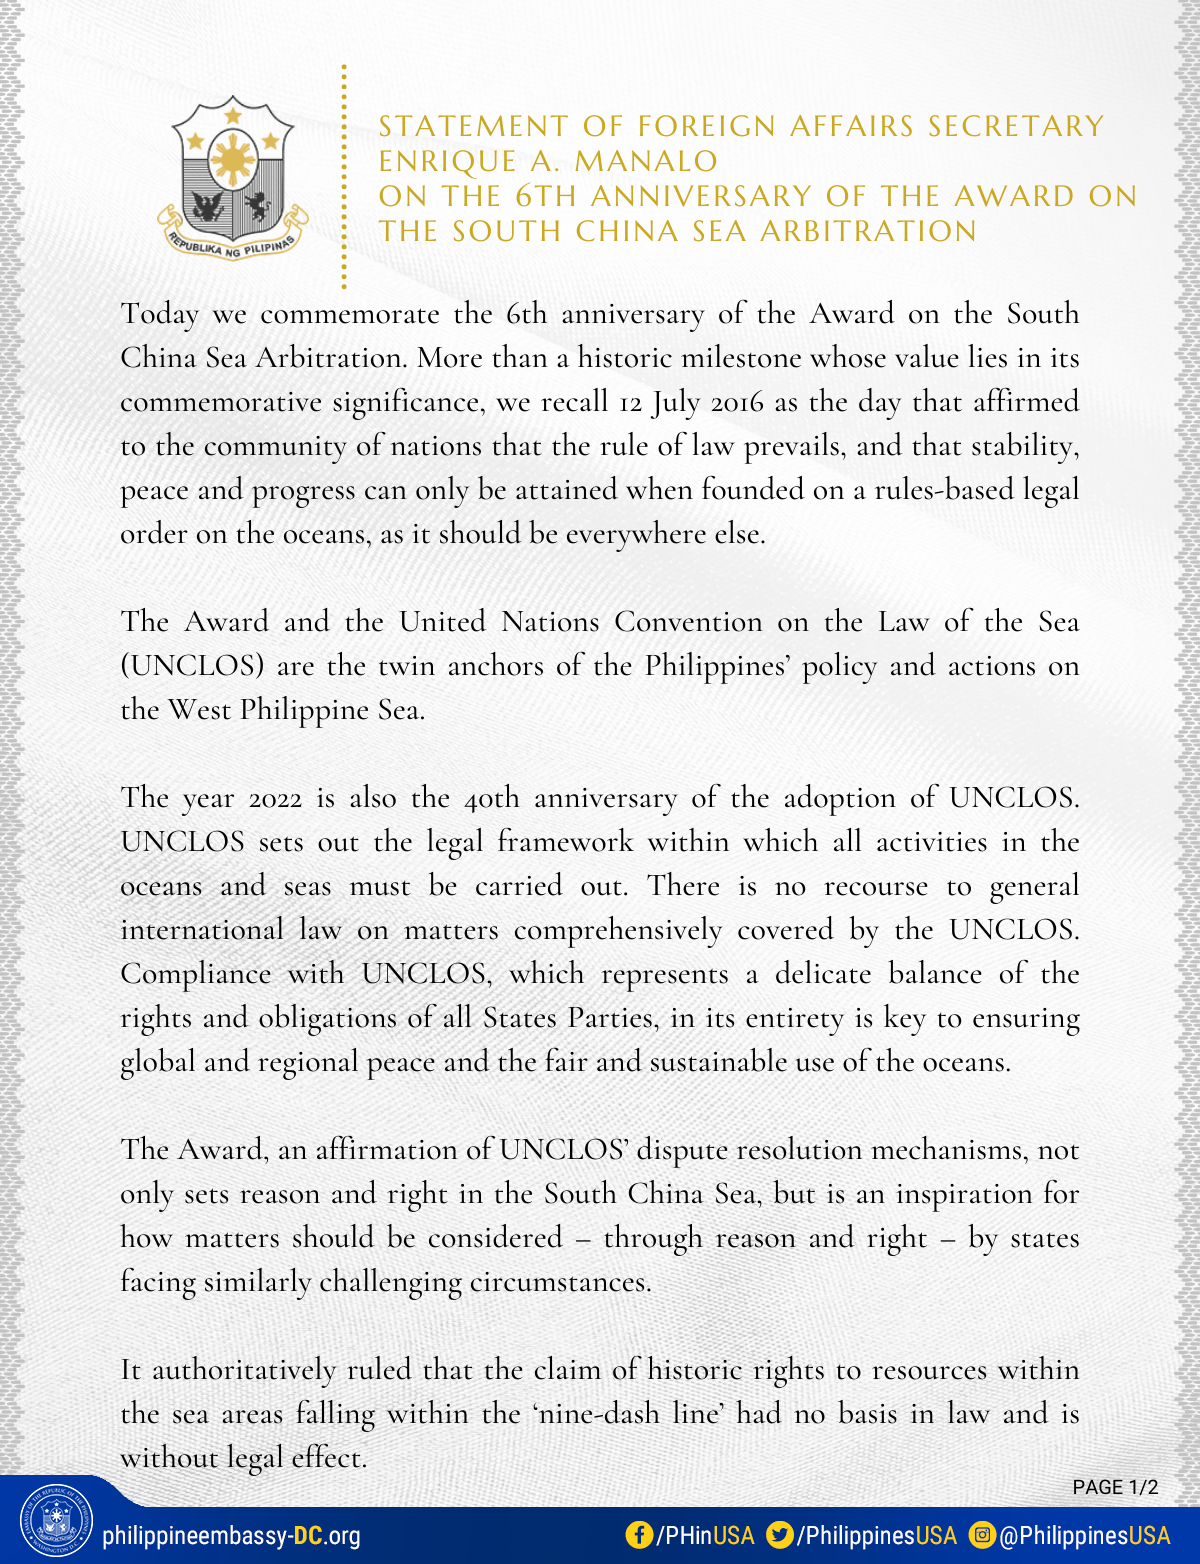 STATEMENT OF FOREIGN AFFAIRS SECRETARY ENRIQUE A. MANALO ON THE 6TH ANNIVERSARY OF THE AWARD ON THE SOUTH CHINA SEA ARBITRATION